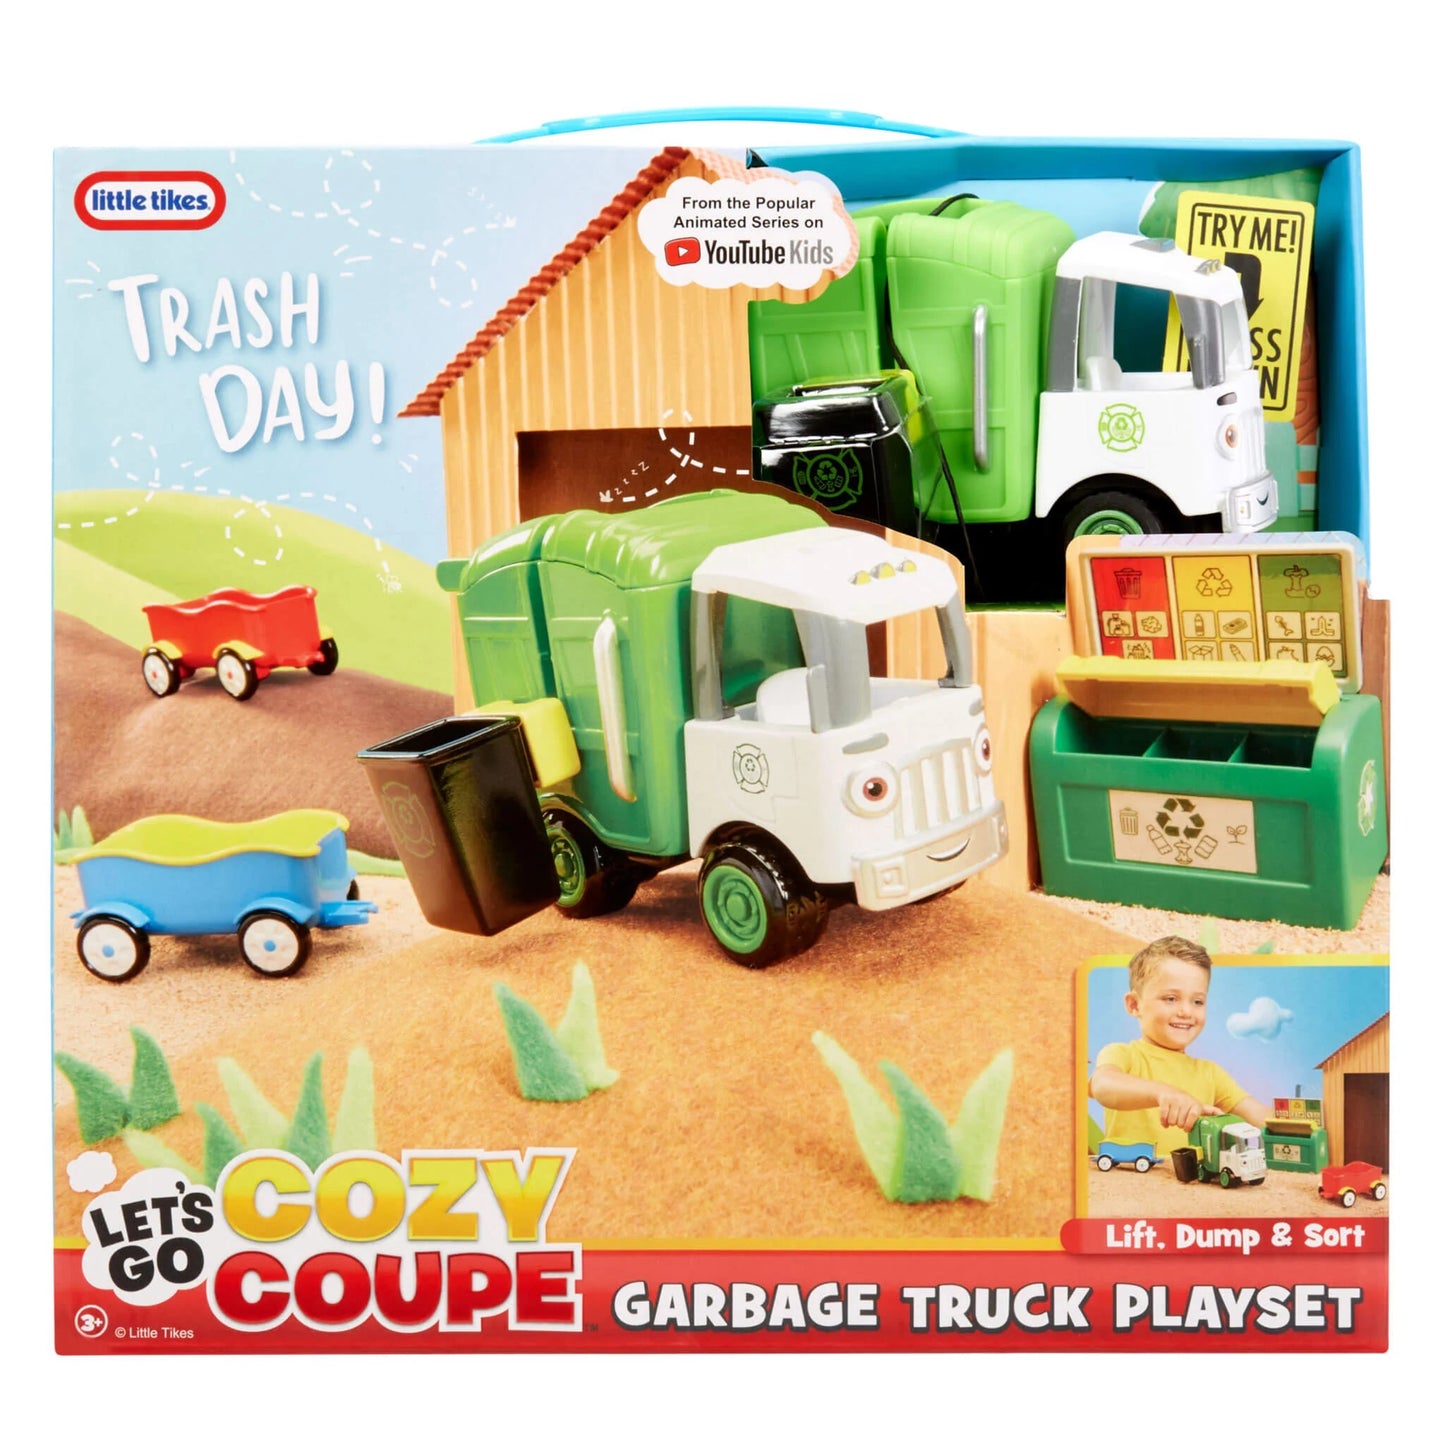 Little Tikes - Let's Go Cozy Coupe Garbage Truck Playset